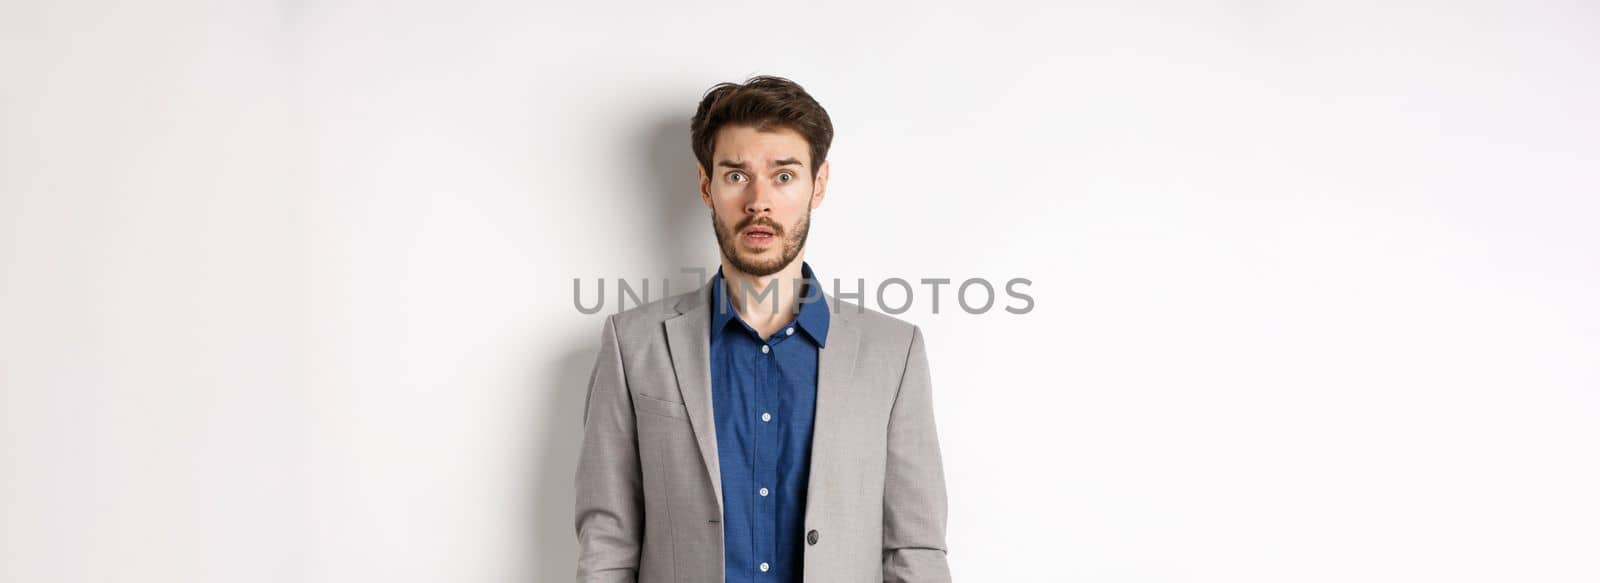 Shocked male entrepreneur in suit drop jaw, staring worried and confused at camera, standing against white background.